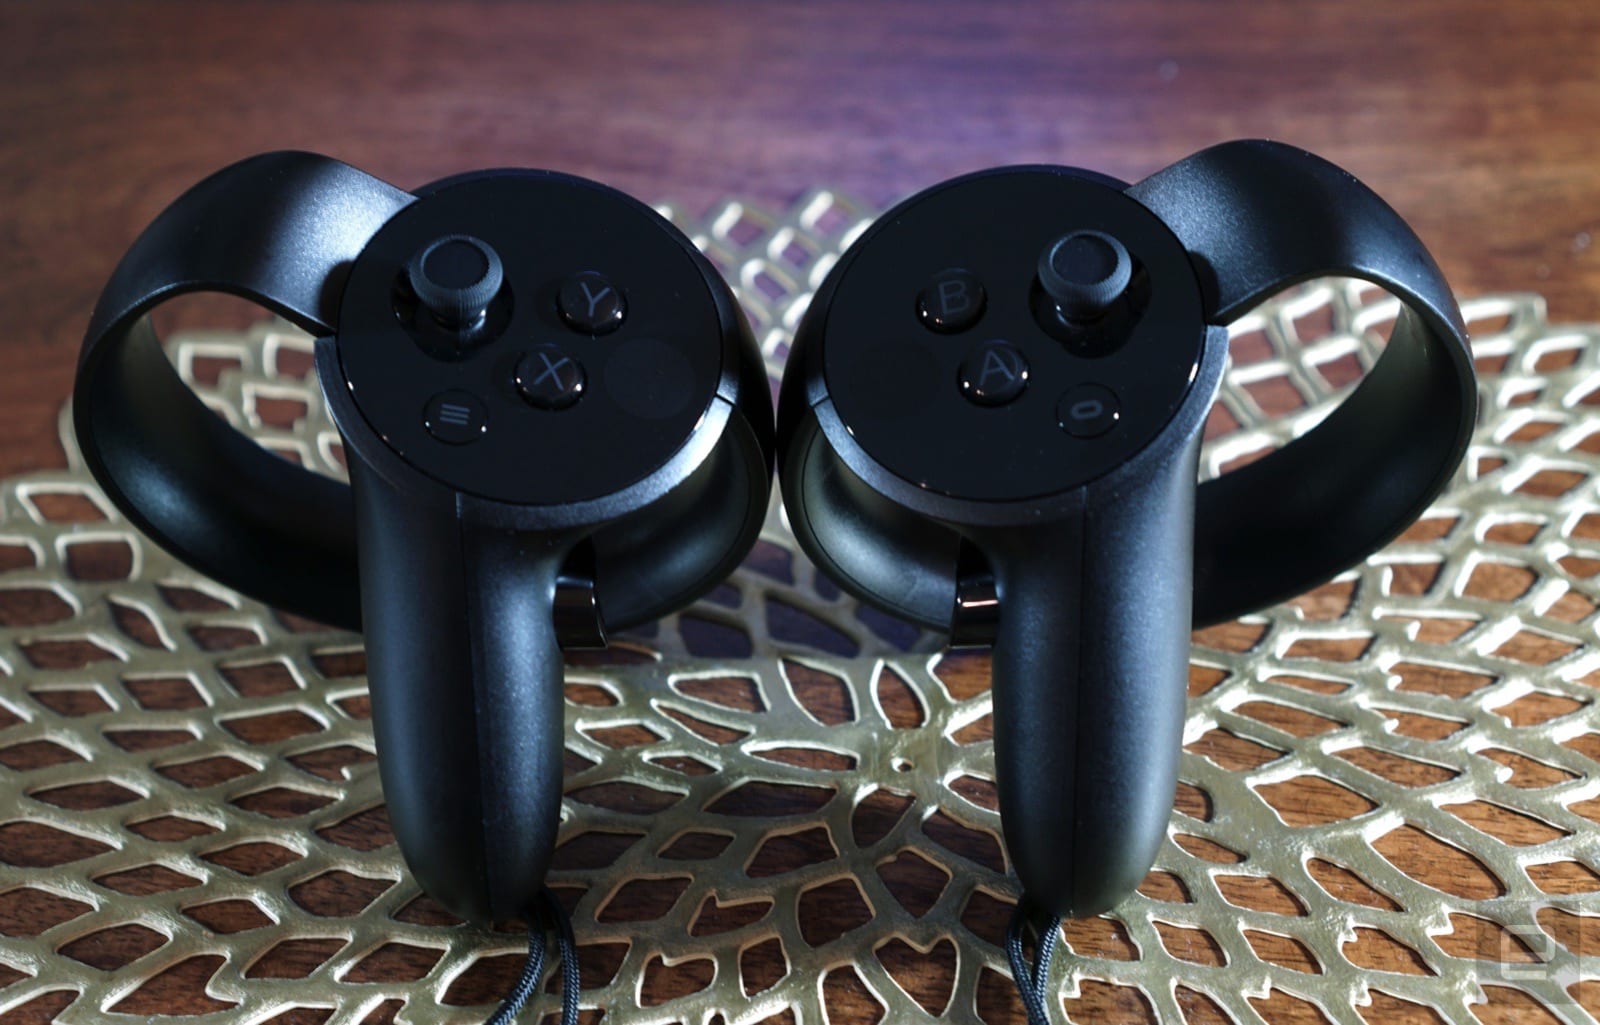 Oculus' controllers are well worth the wait Engadget